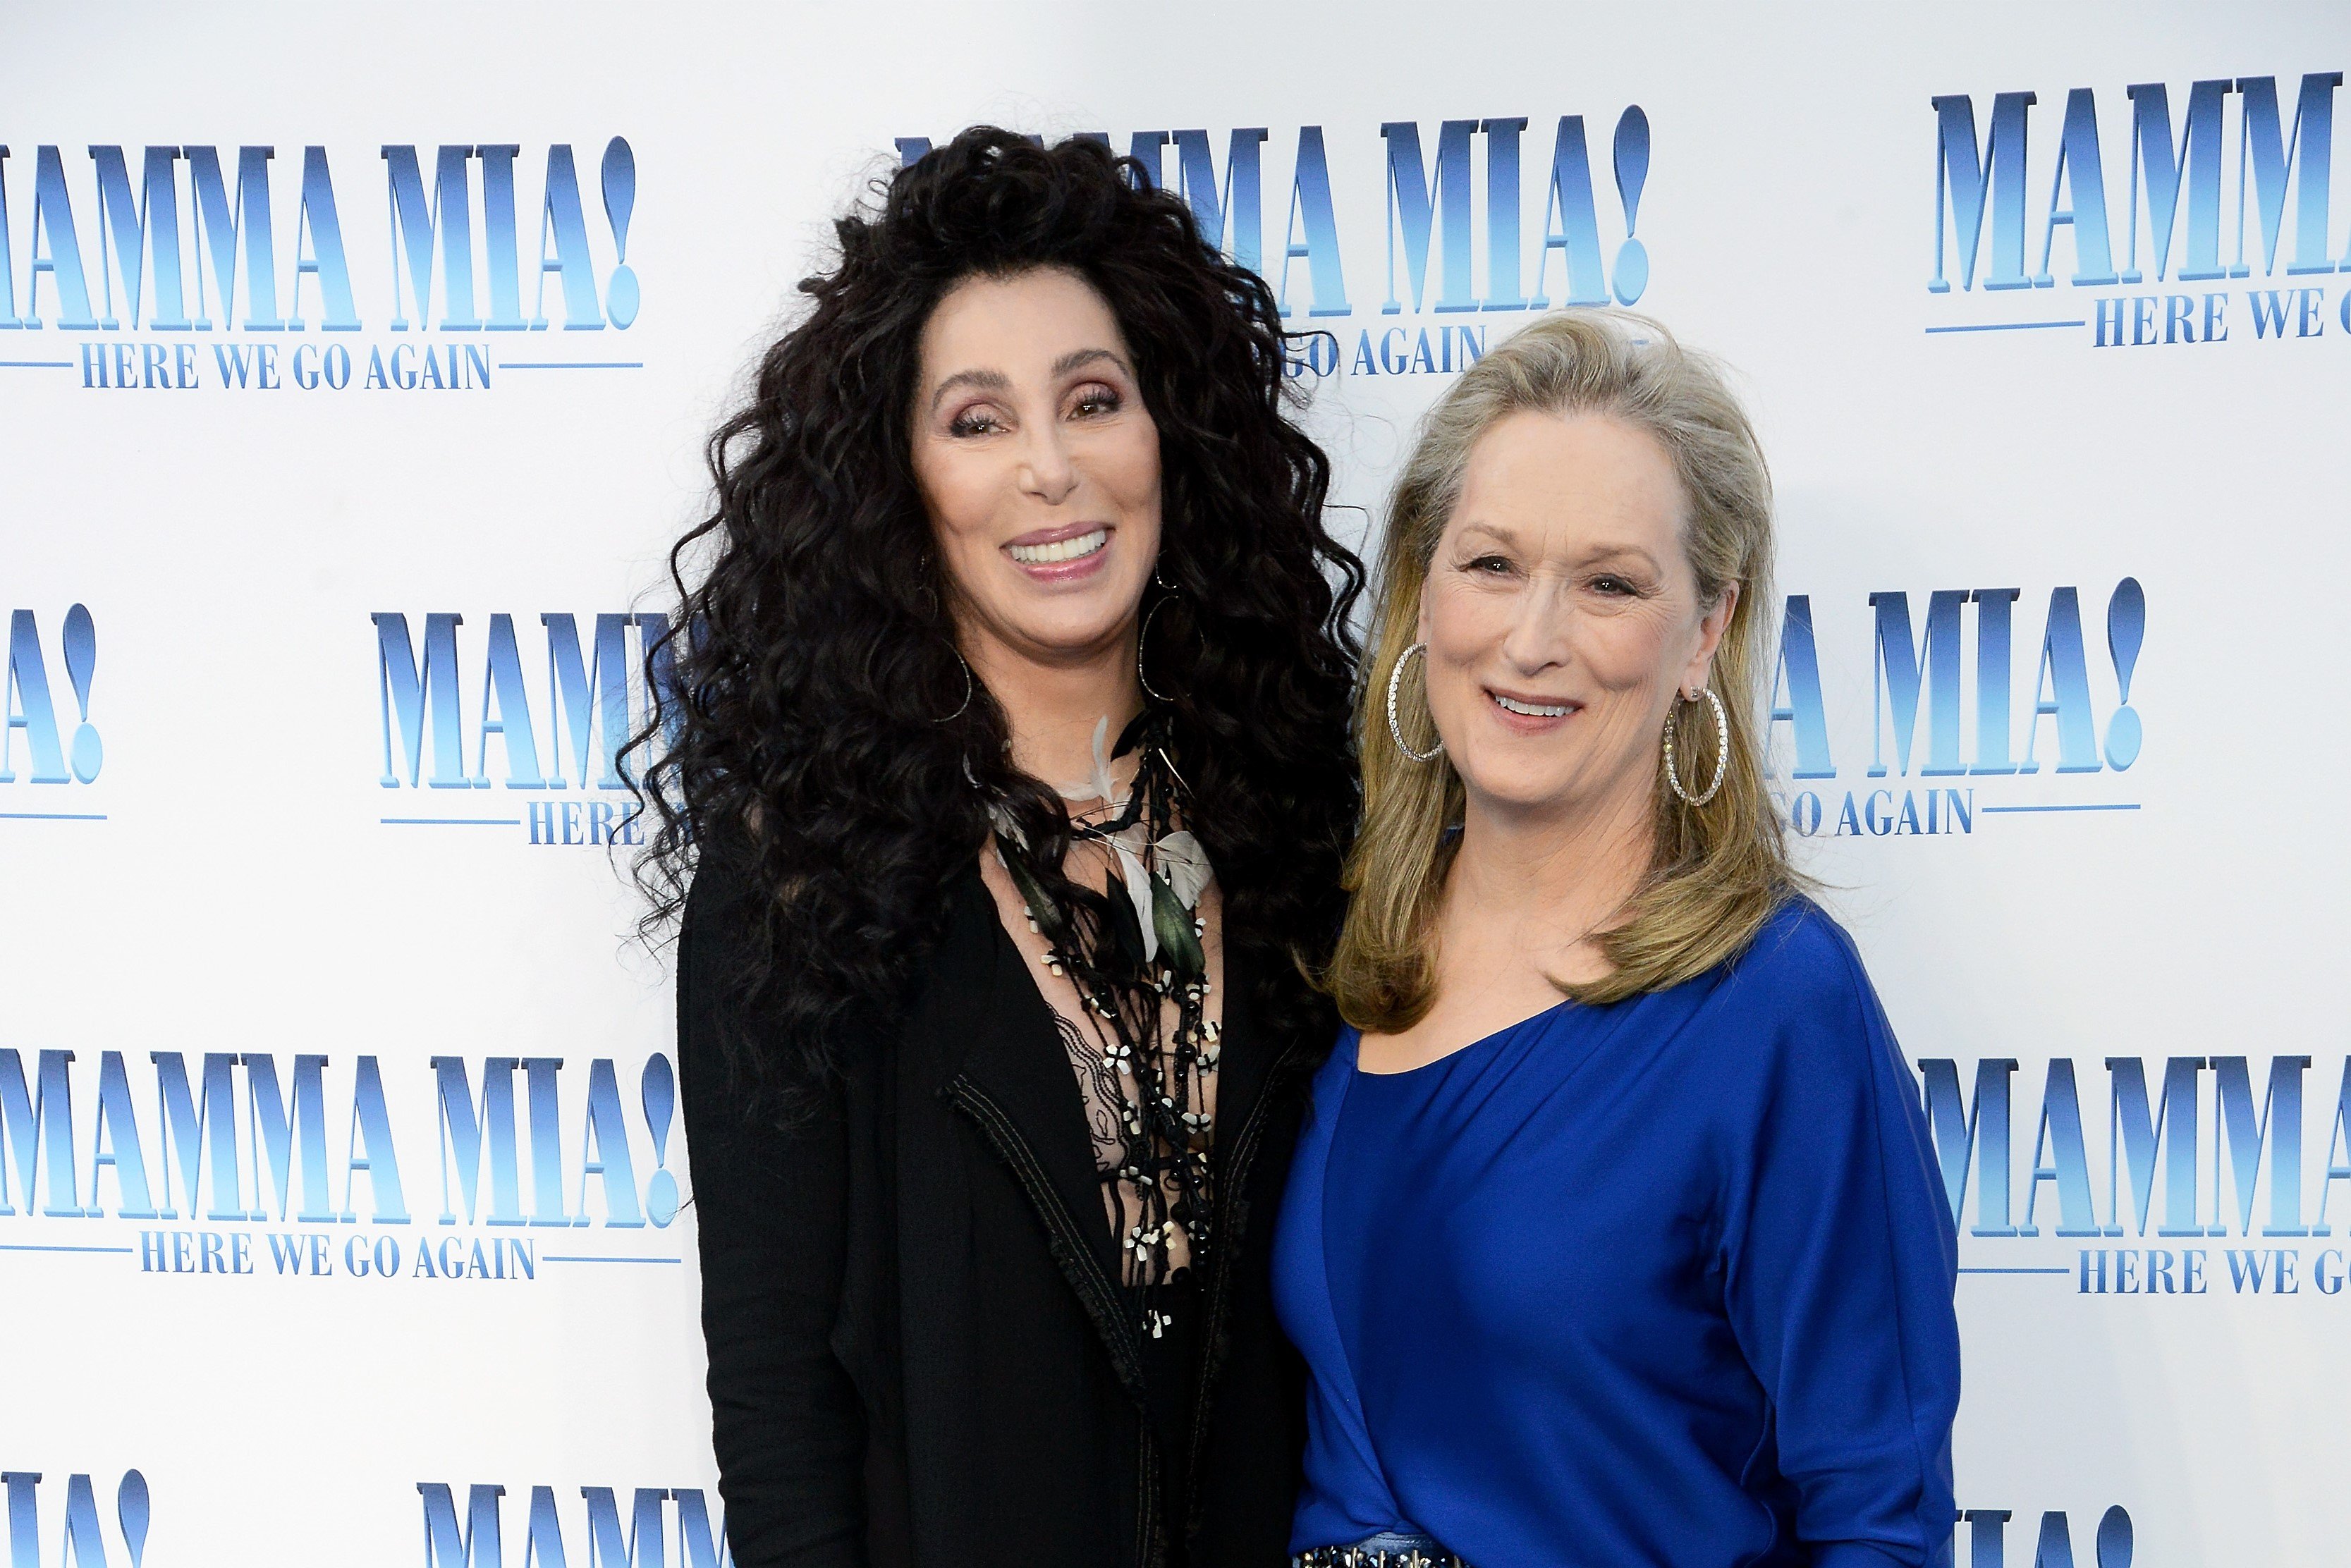 Cher wears a black dress and Meryl Streep wears a blue dress. They stand in front of a 'Mamma Mia! Here We Go Again' poster.